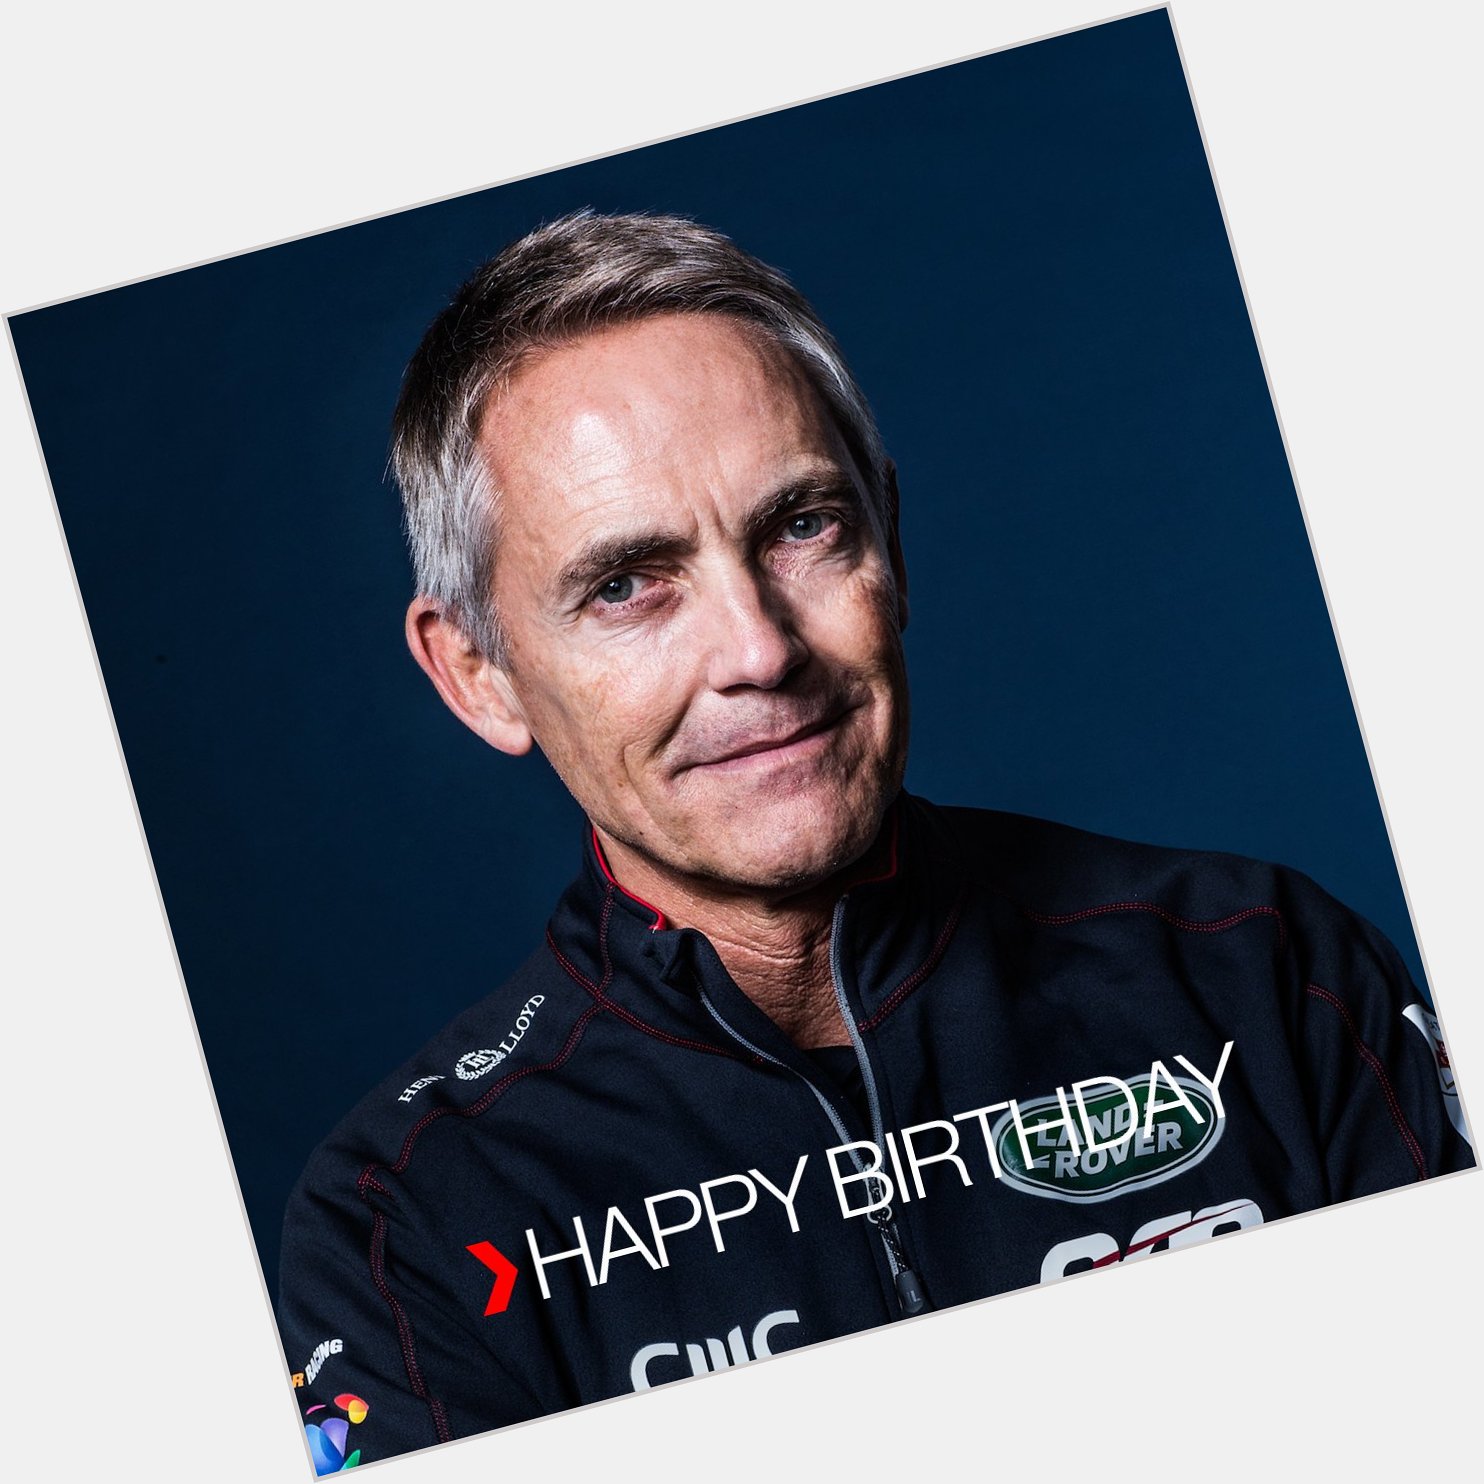 Wishing our CEO, Martin Whitmarsh a very Happy Birthday        